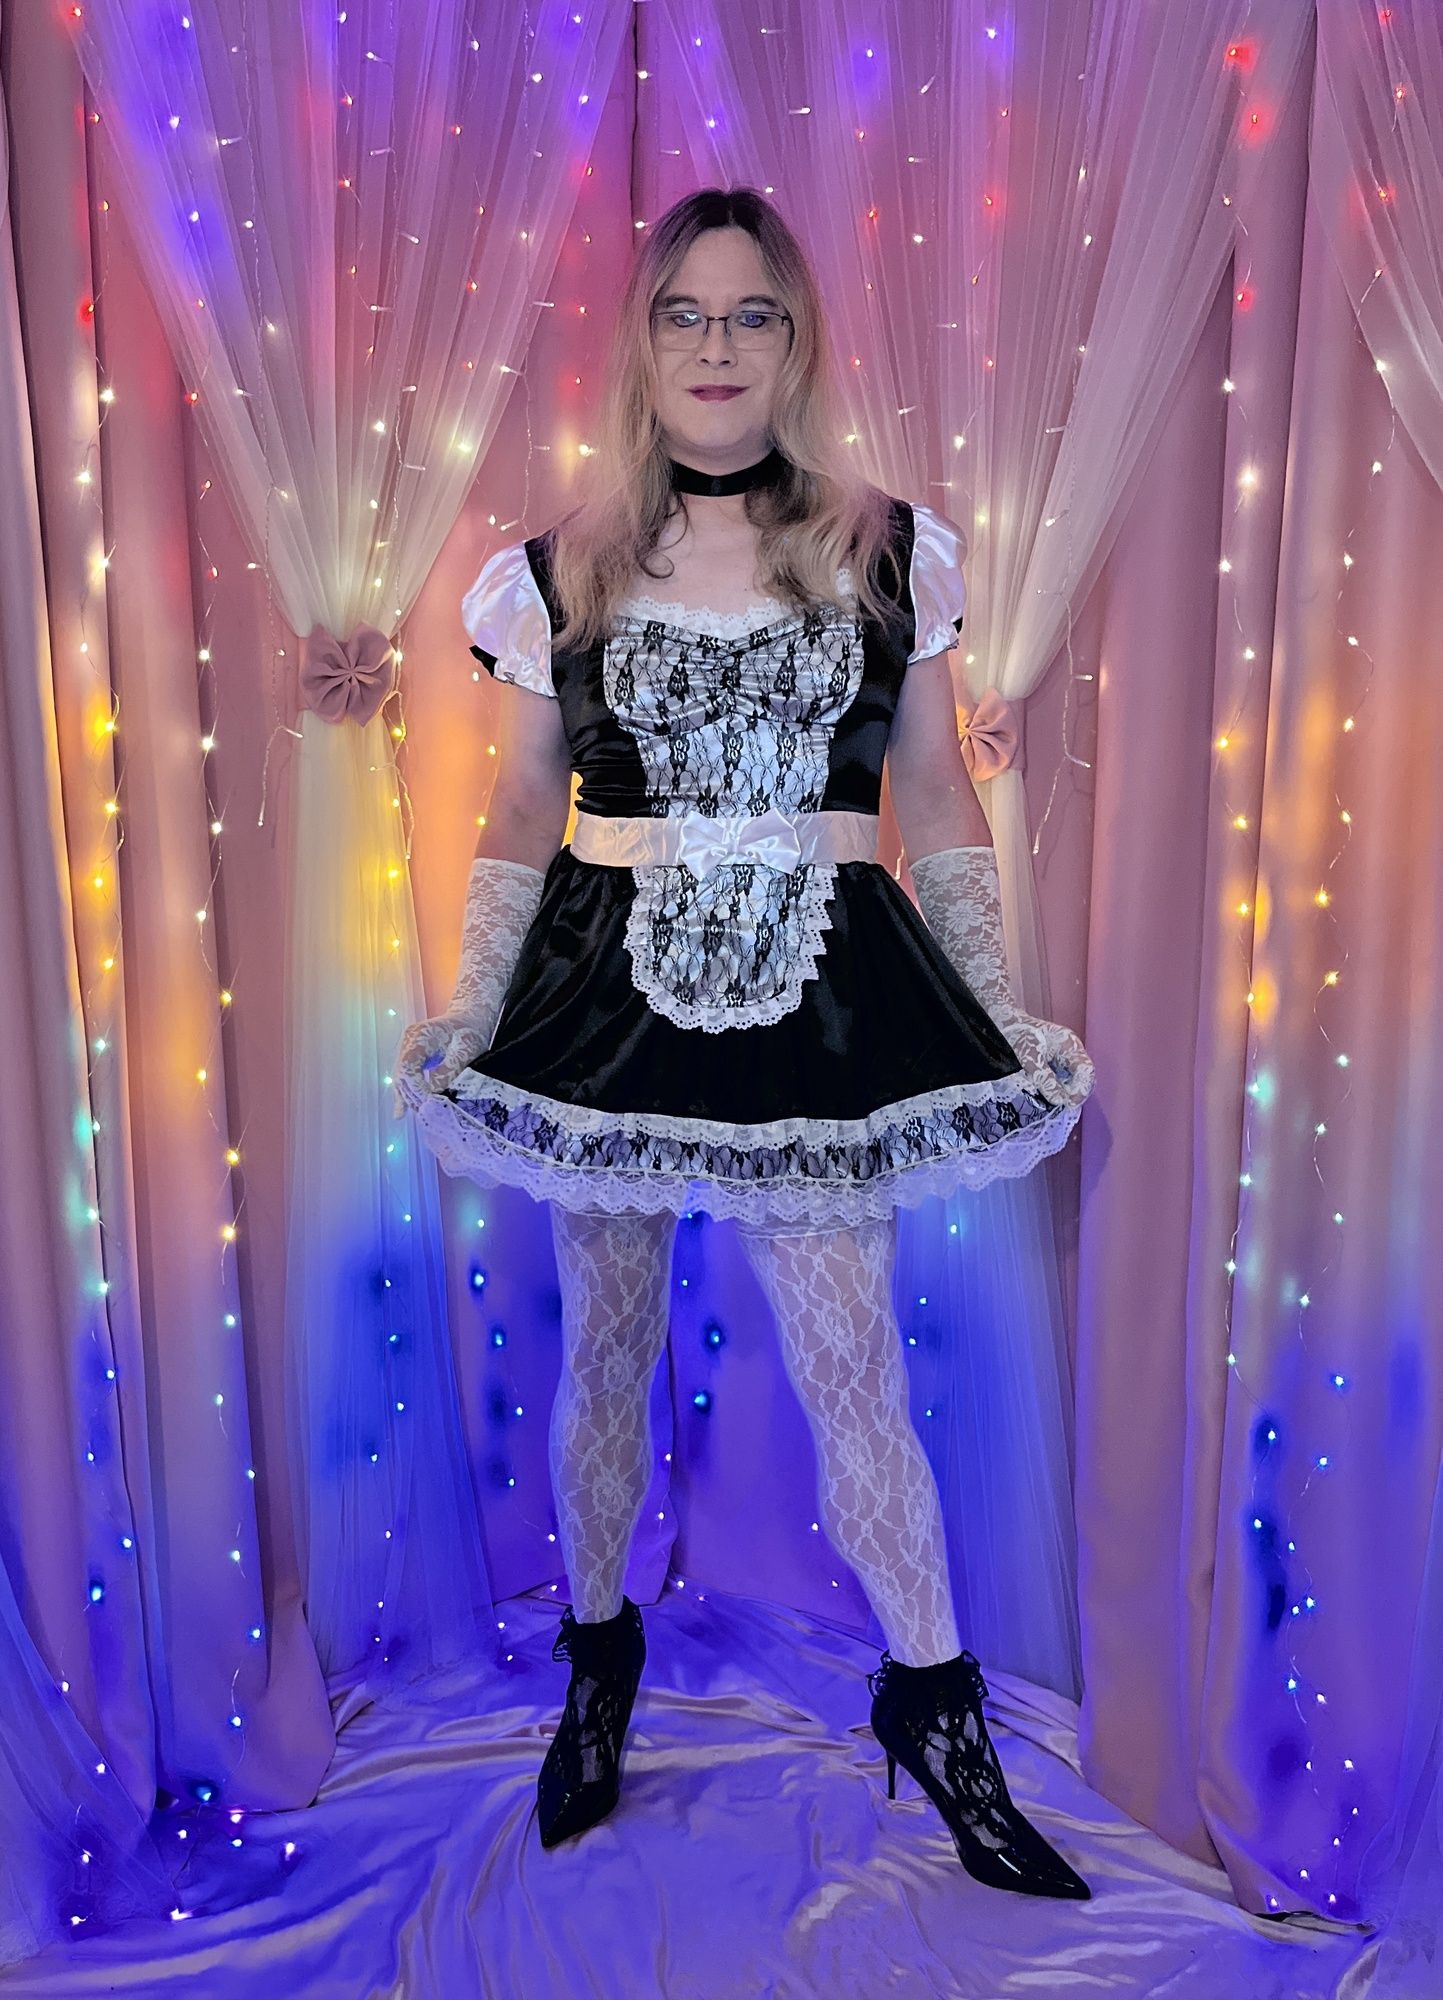 Joanie - Maid In Lace #16